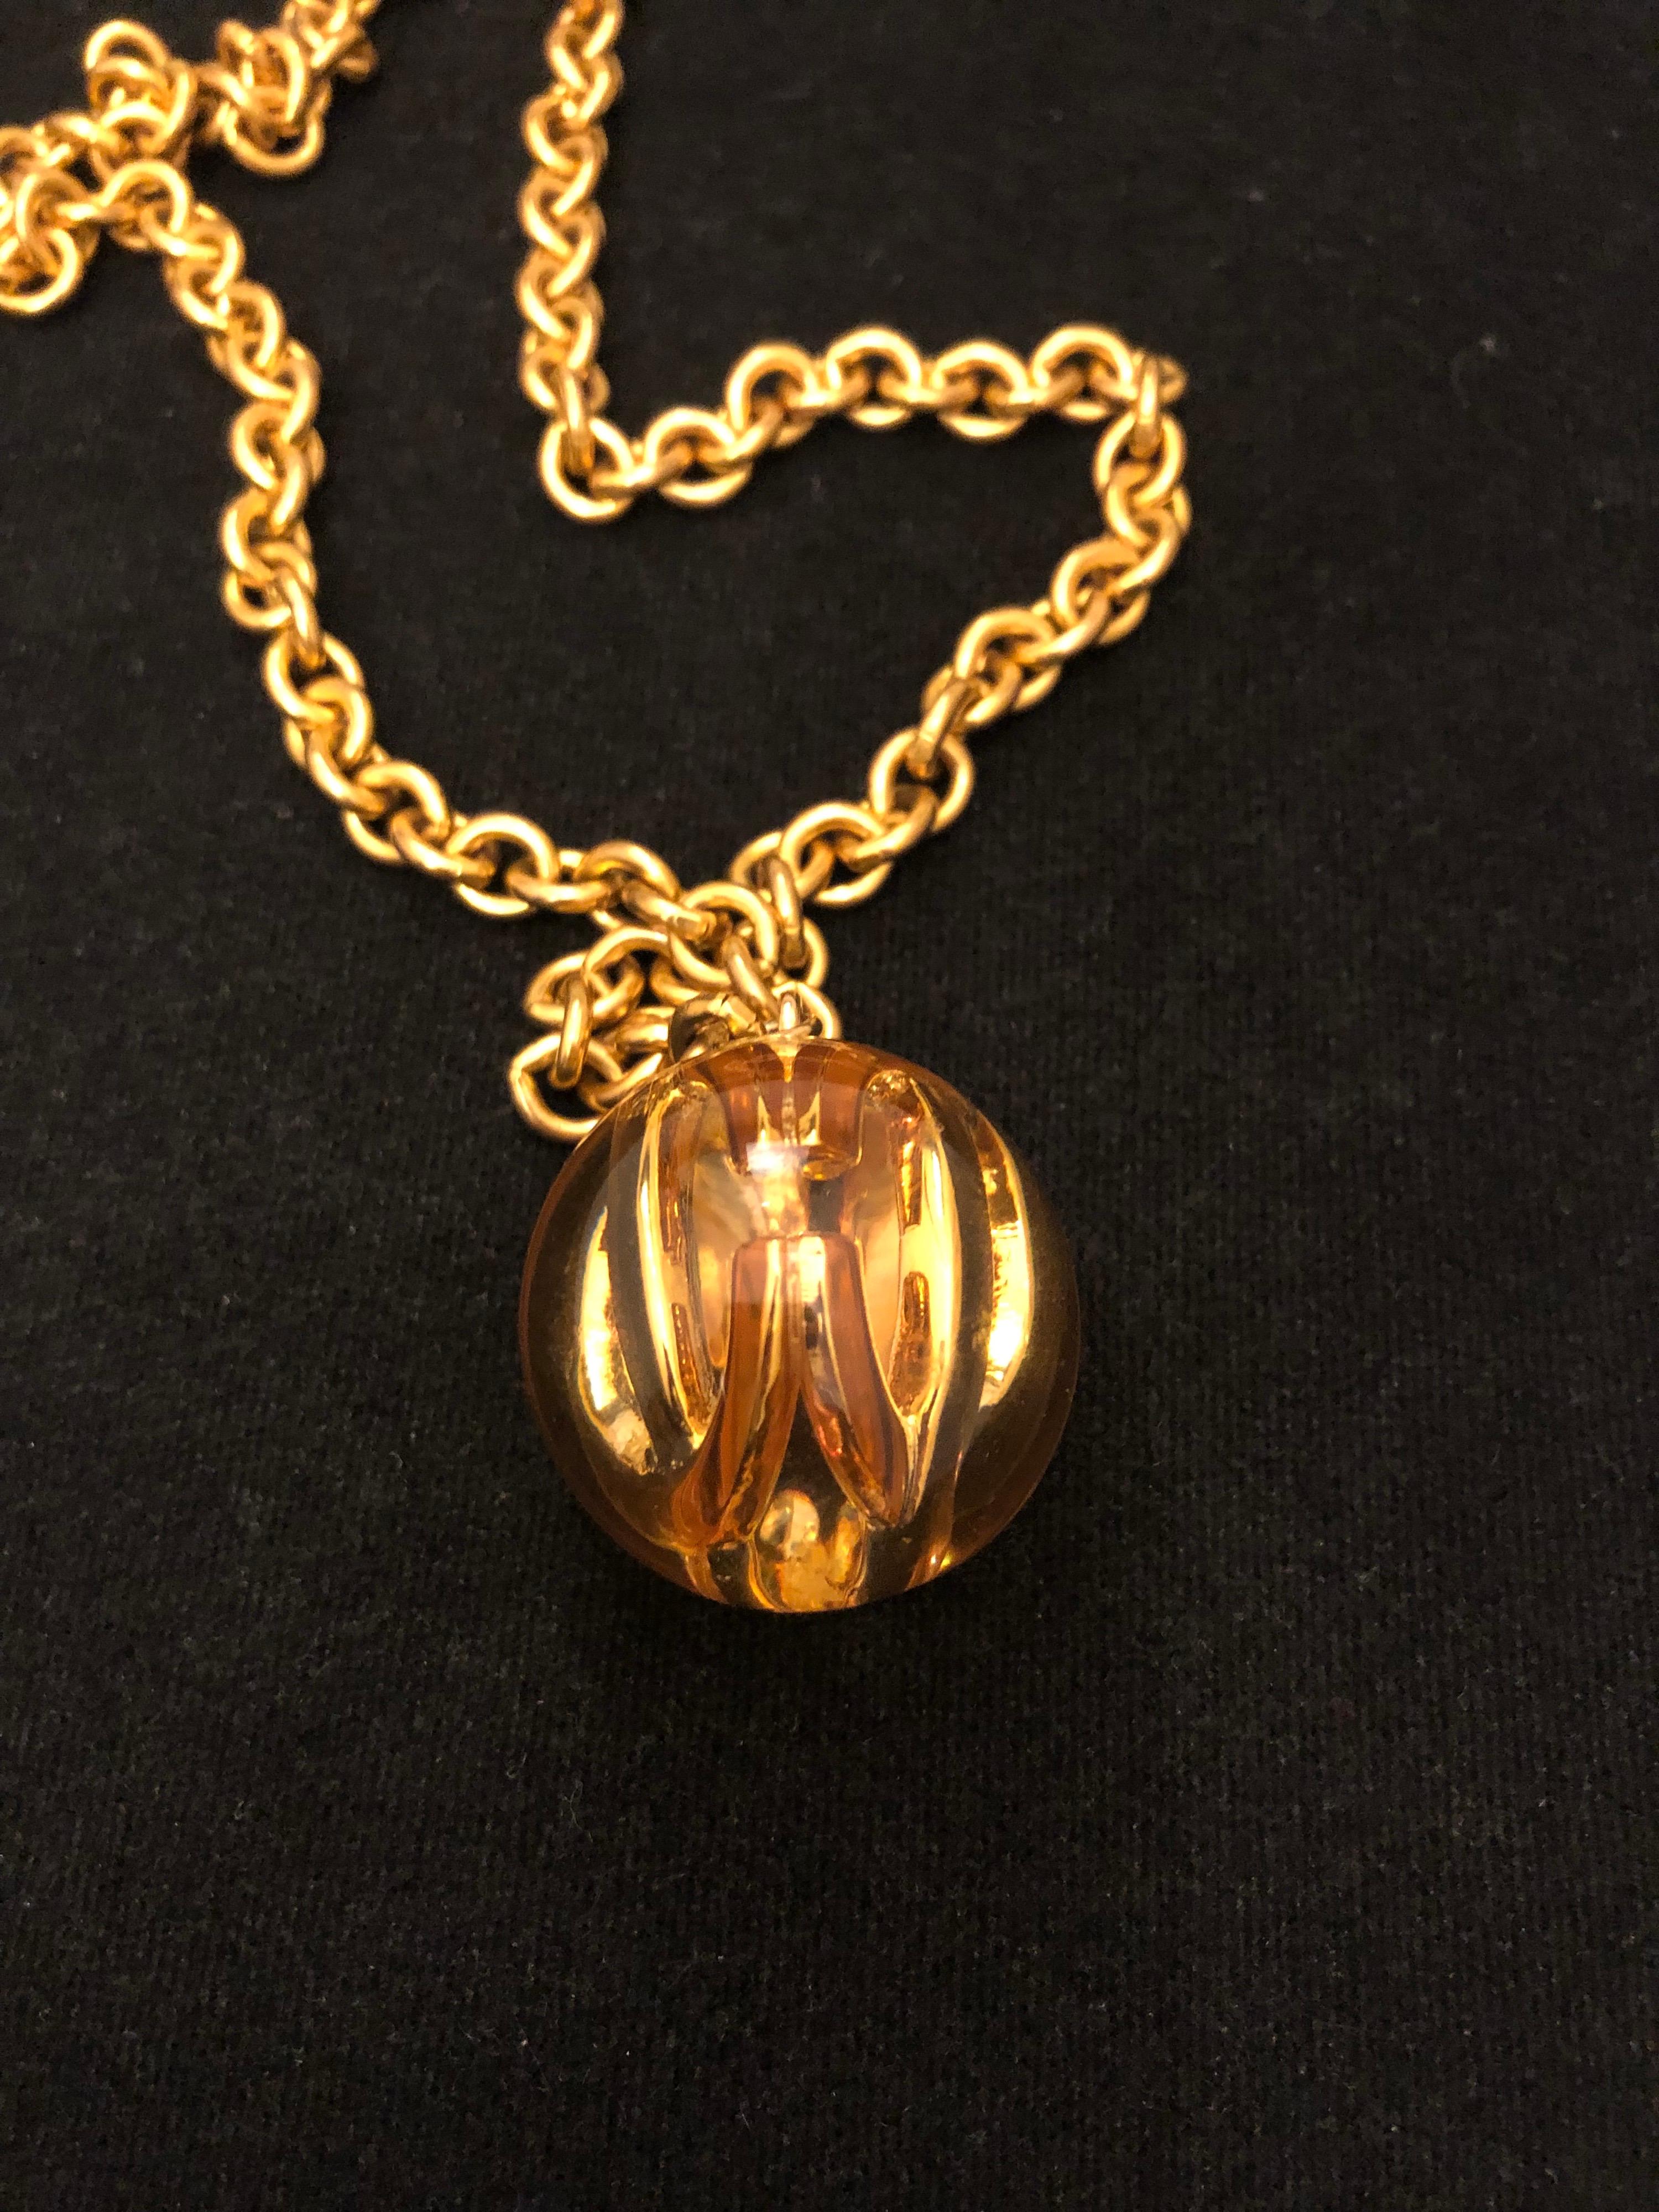 Women's or Men's 1980s Chanel Gold Toned Long Chain Necklace with CC Resin Ball Charm